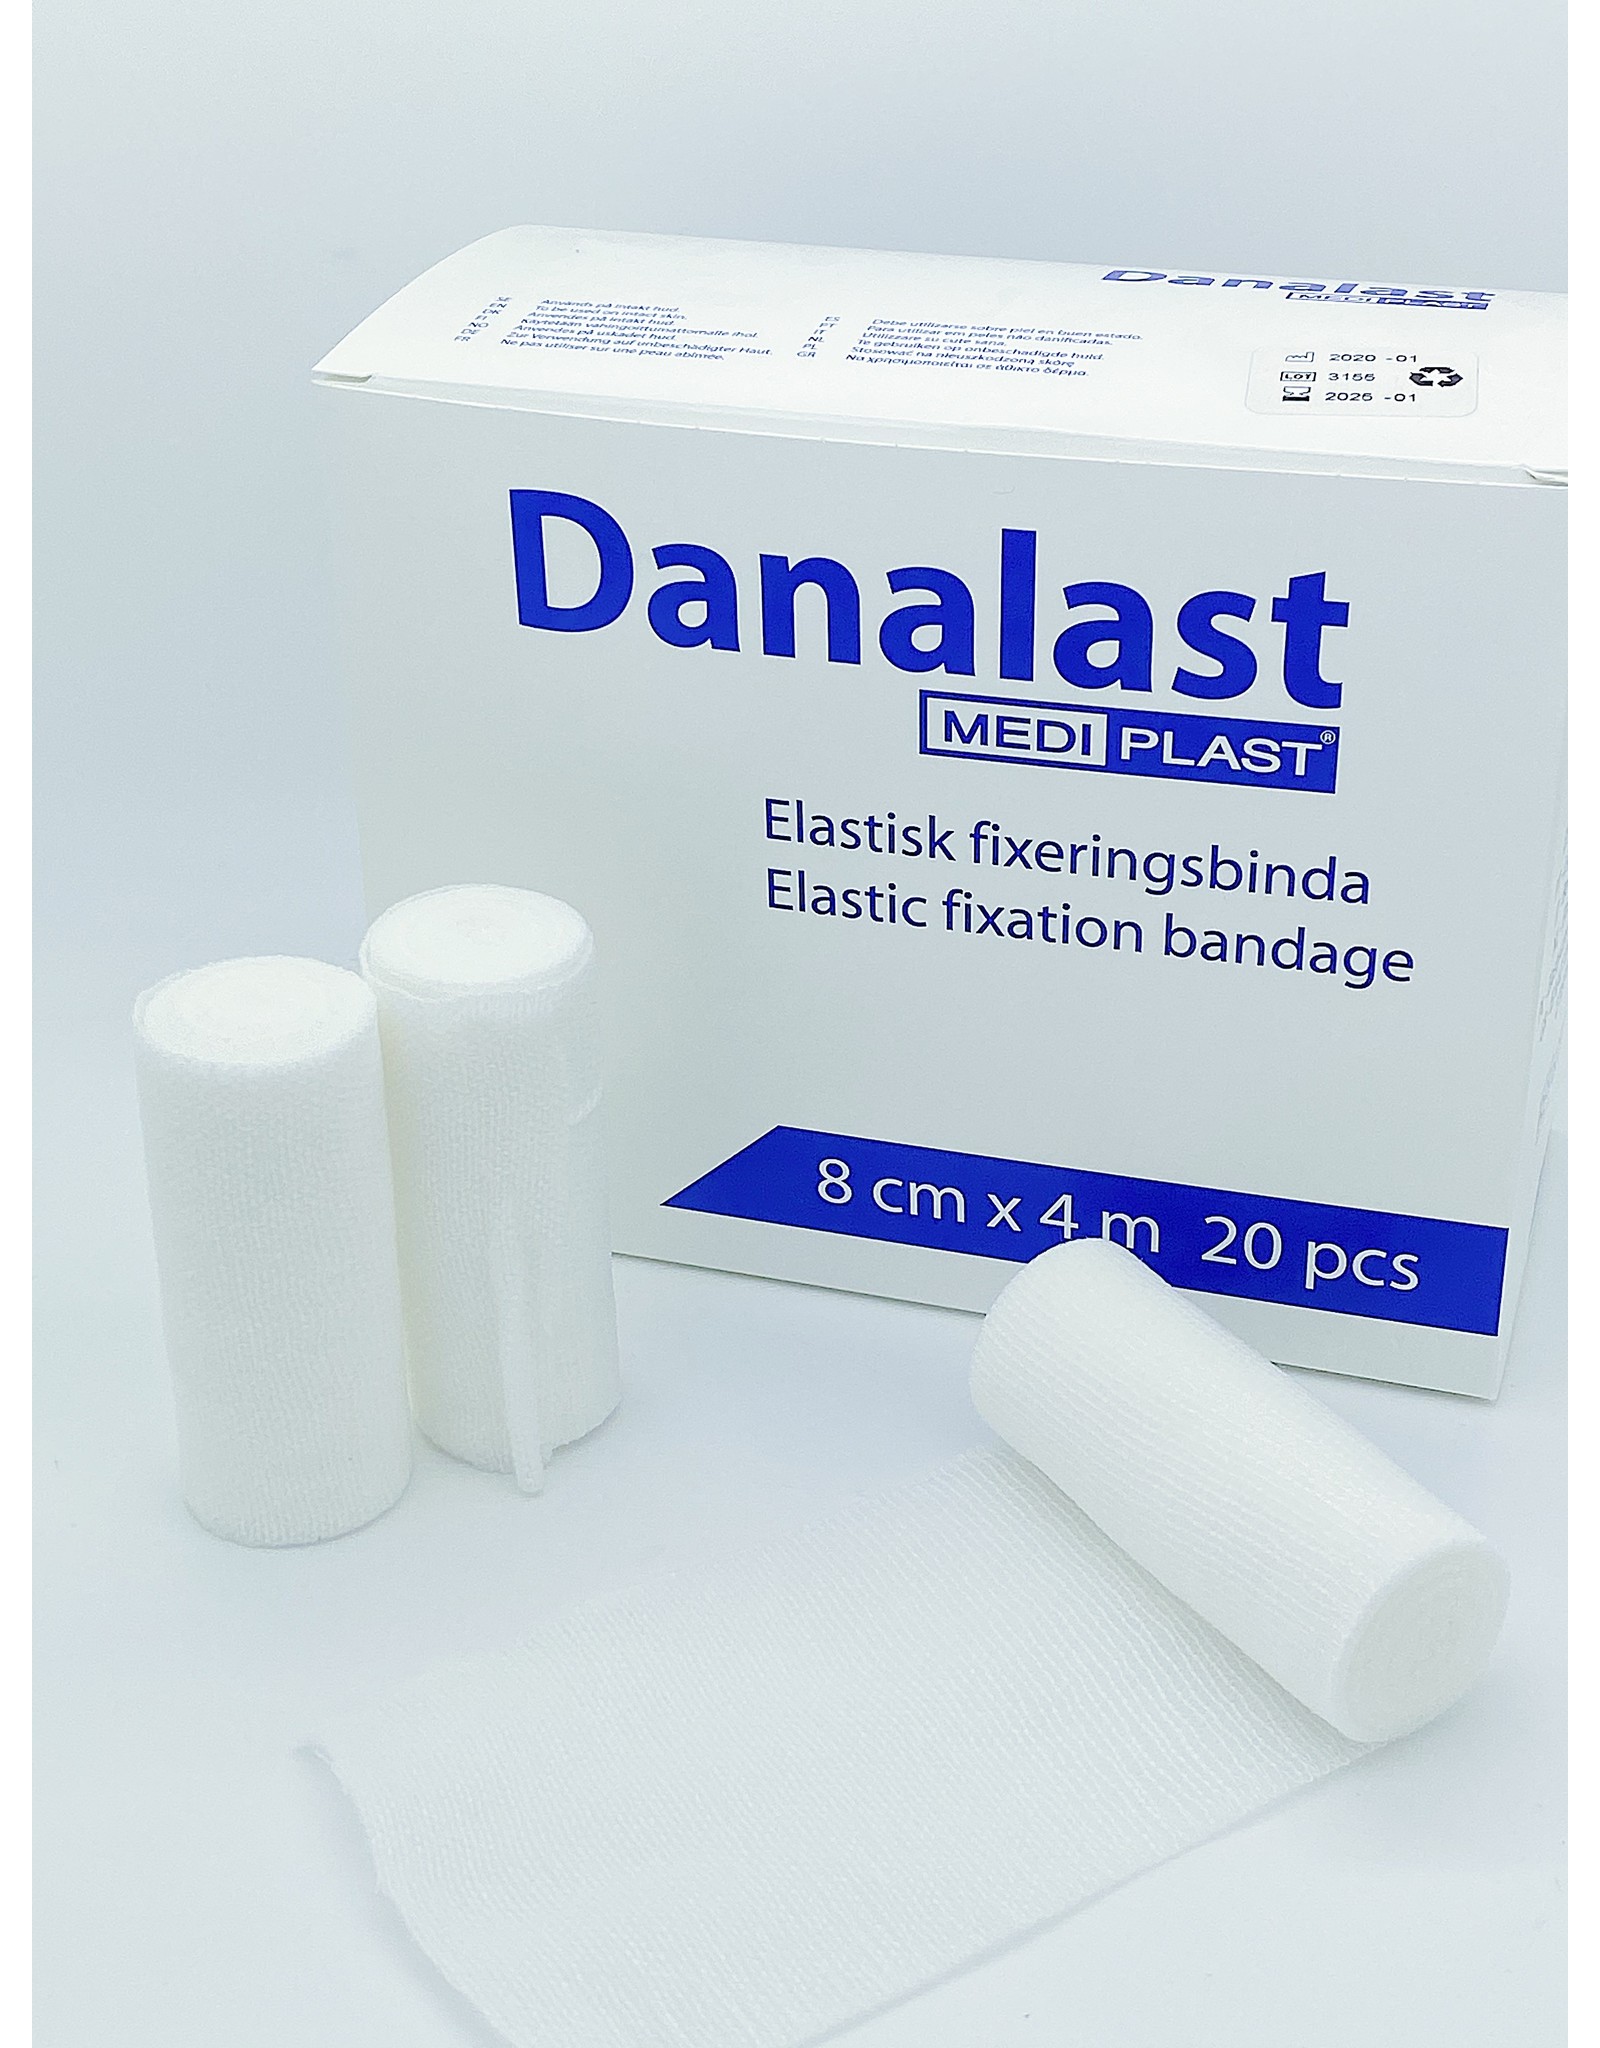 Non-elastic fixation bandage 6 cm by 5 meters (light stretch)